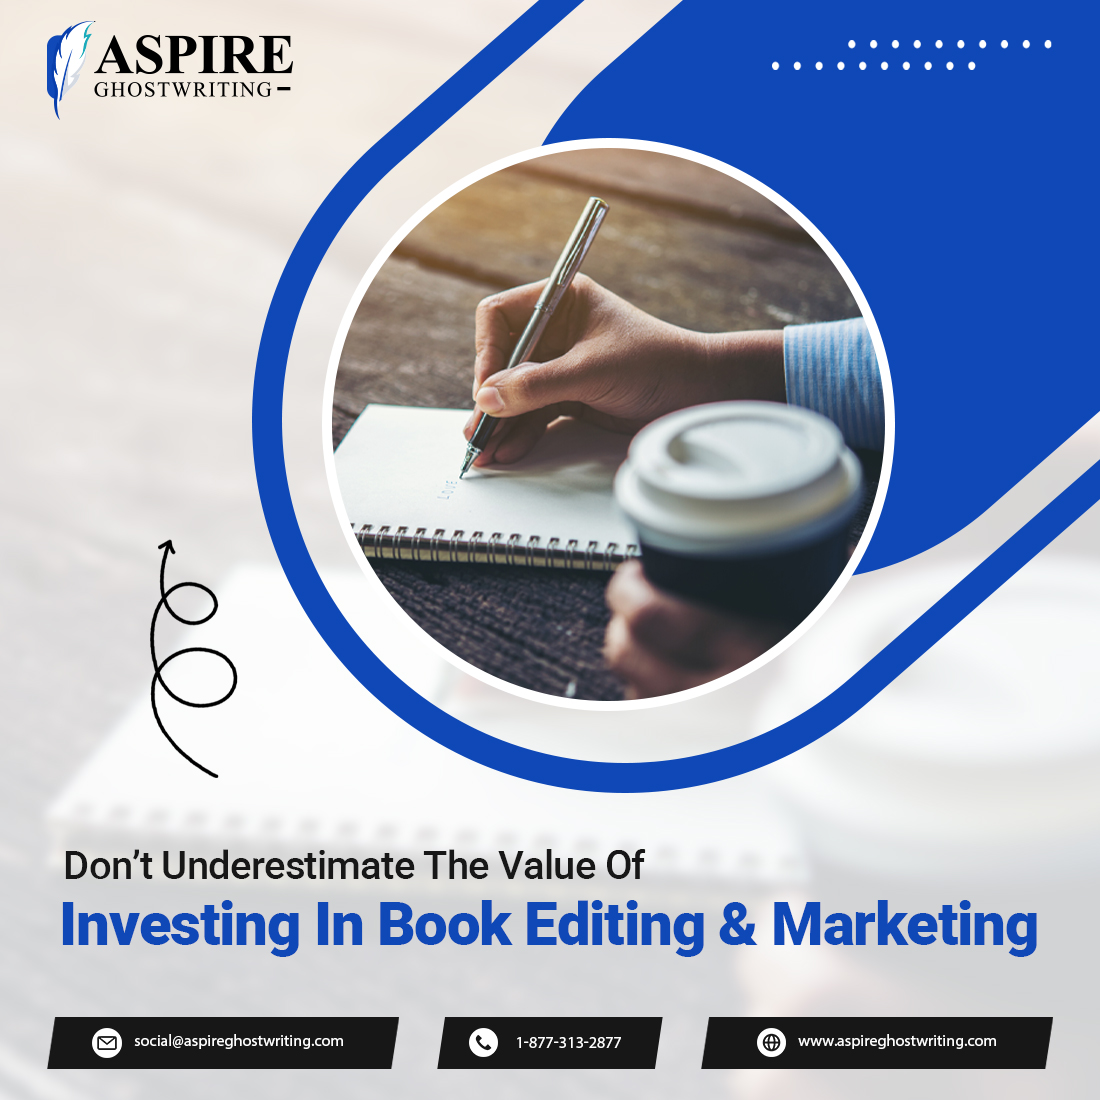 If you want to sell books, identify the time required for professional editing, proofreading, and marketing.

For further information, visit our website: aspireghostwriting.com

#aspireghostwriting #writingstyle #bookmarketing #bookpublishing #bookwriting #bookediting